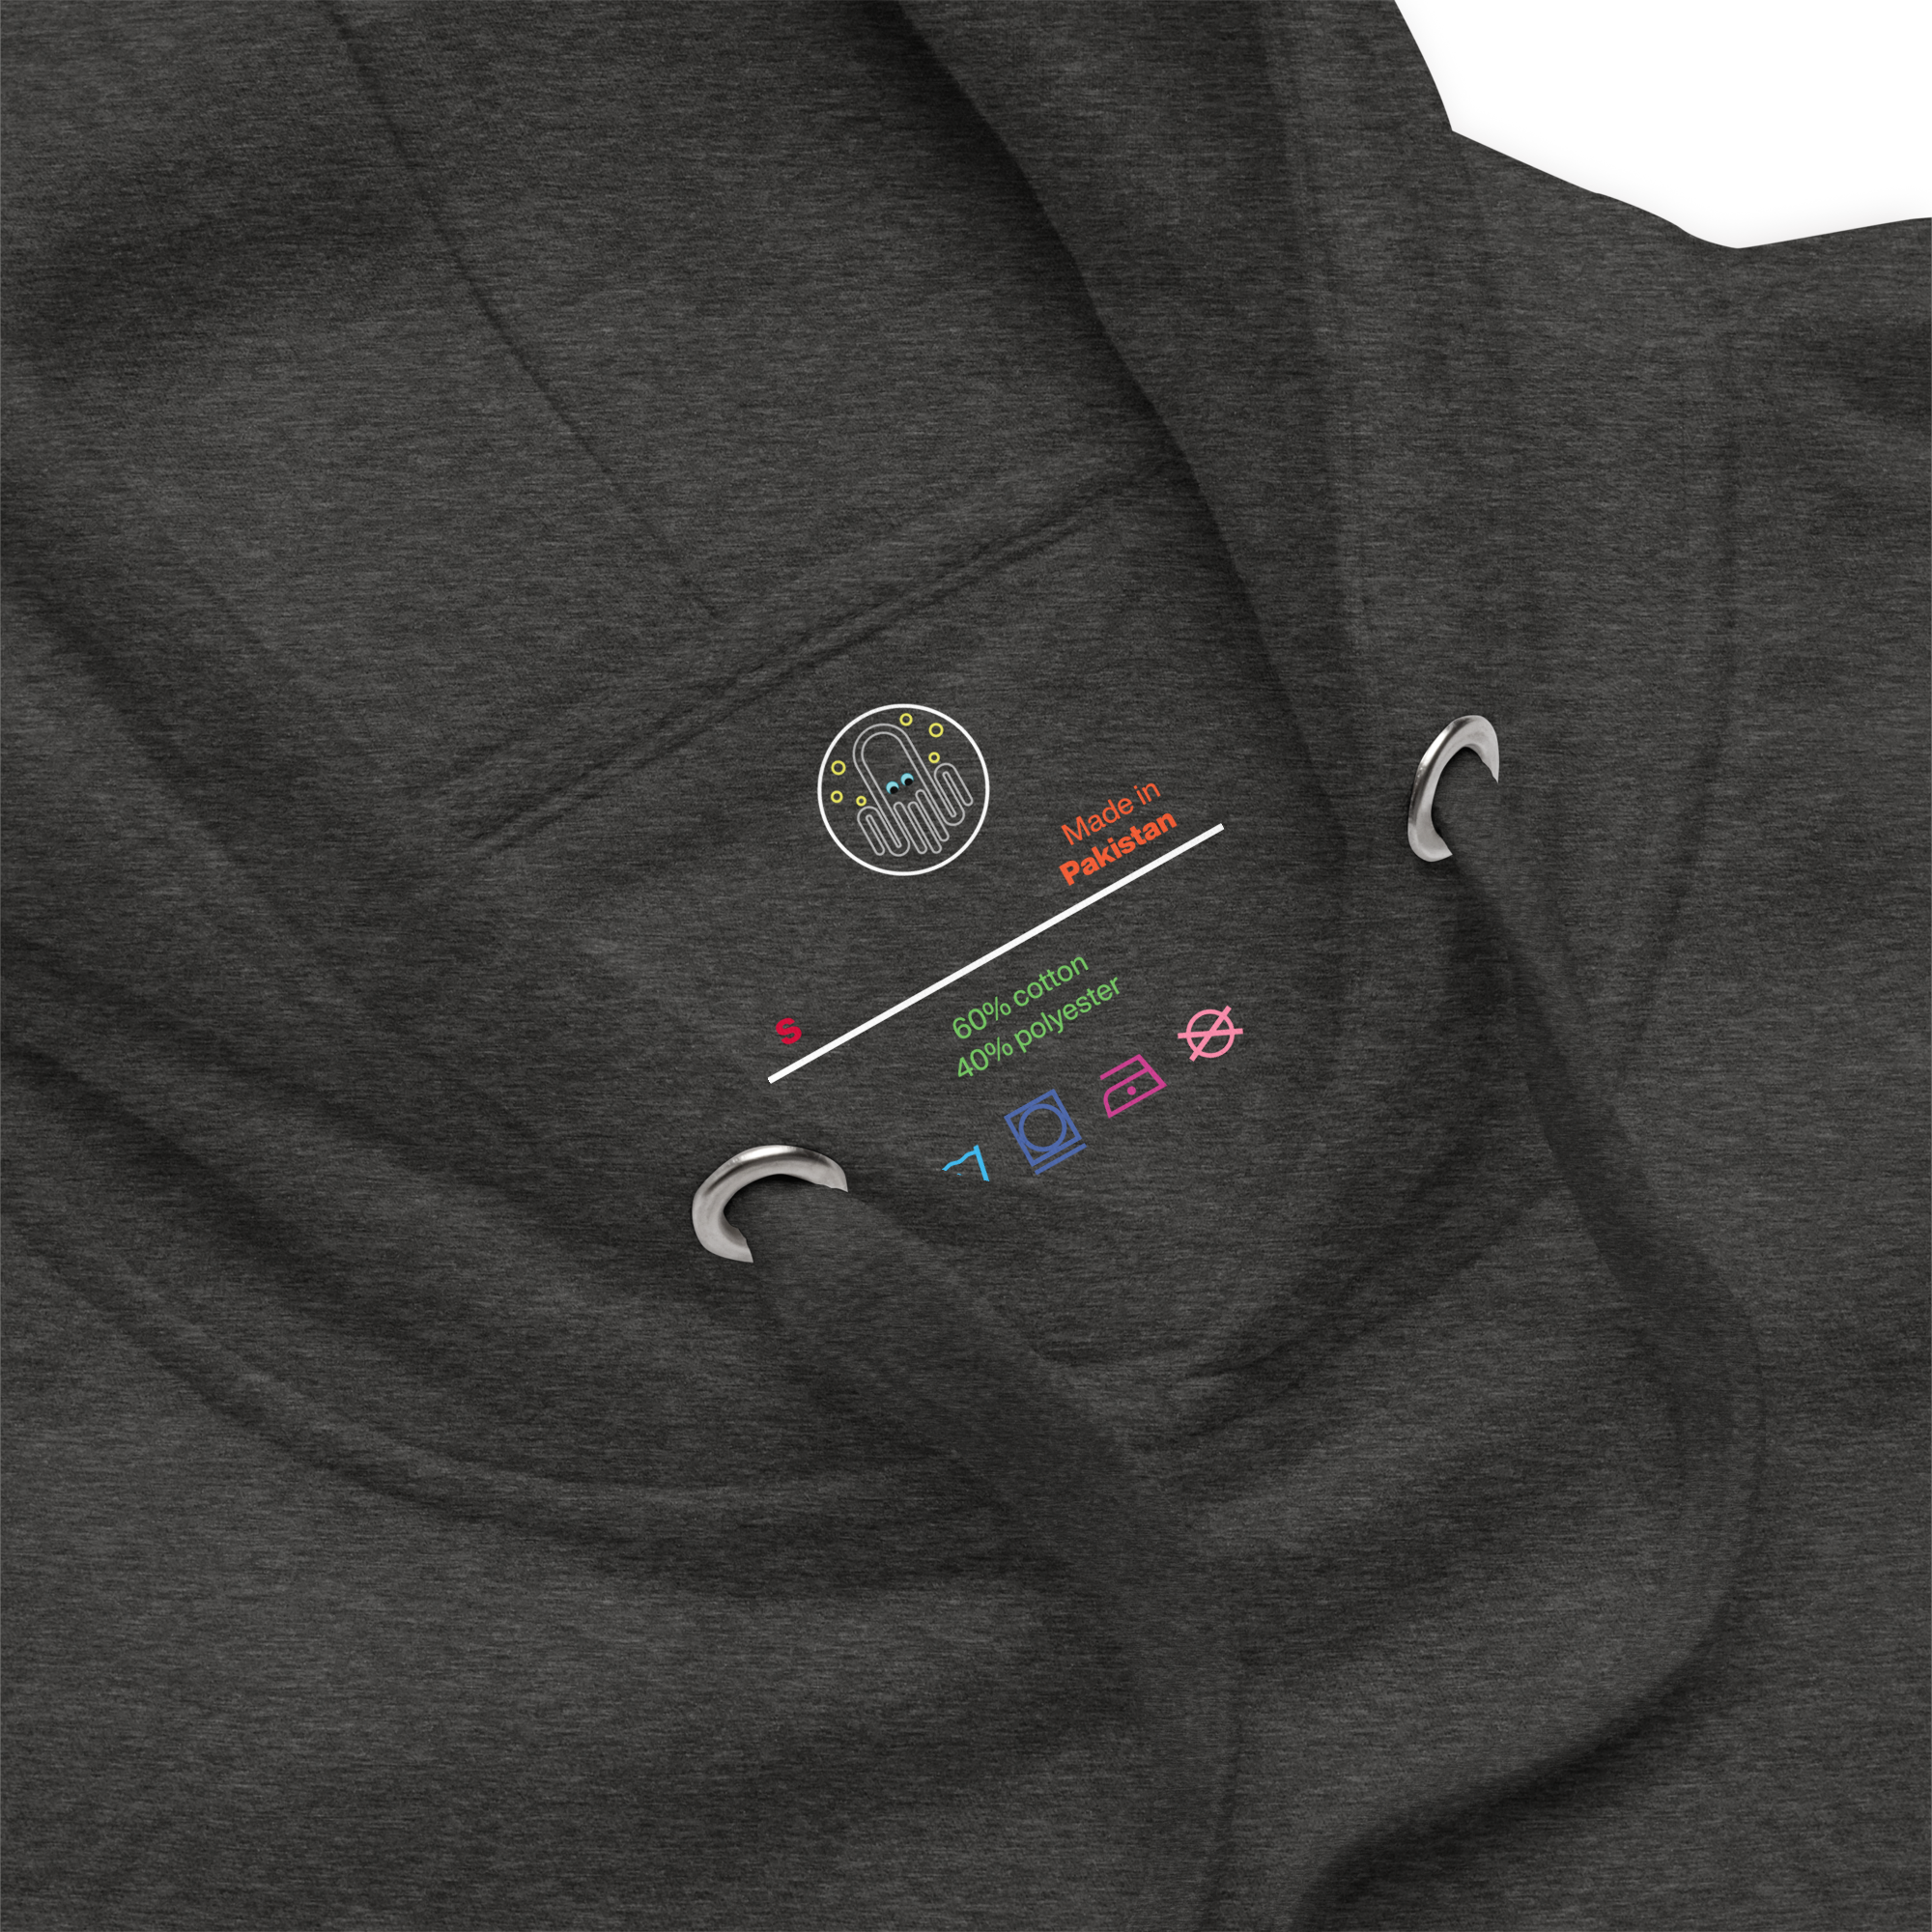 Charcoal Heather Mushroom Love Rainbow Graphic Hoodie Zoomed View of Hood and Inside Label